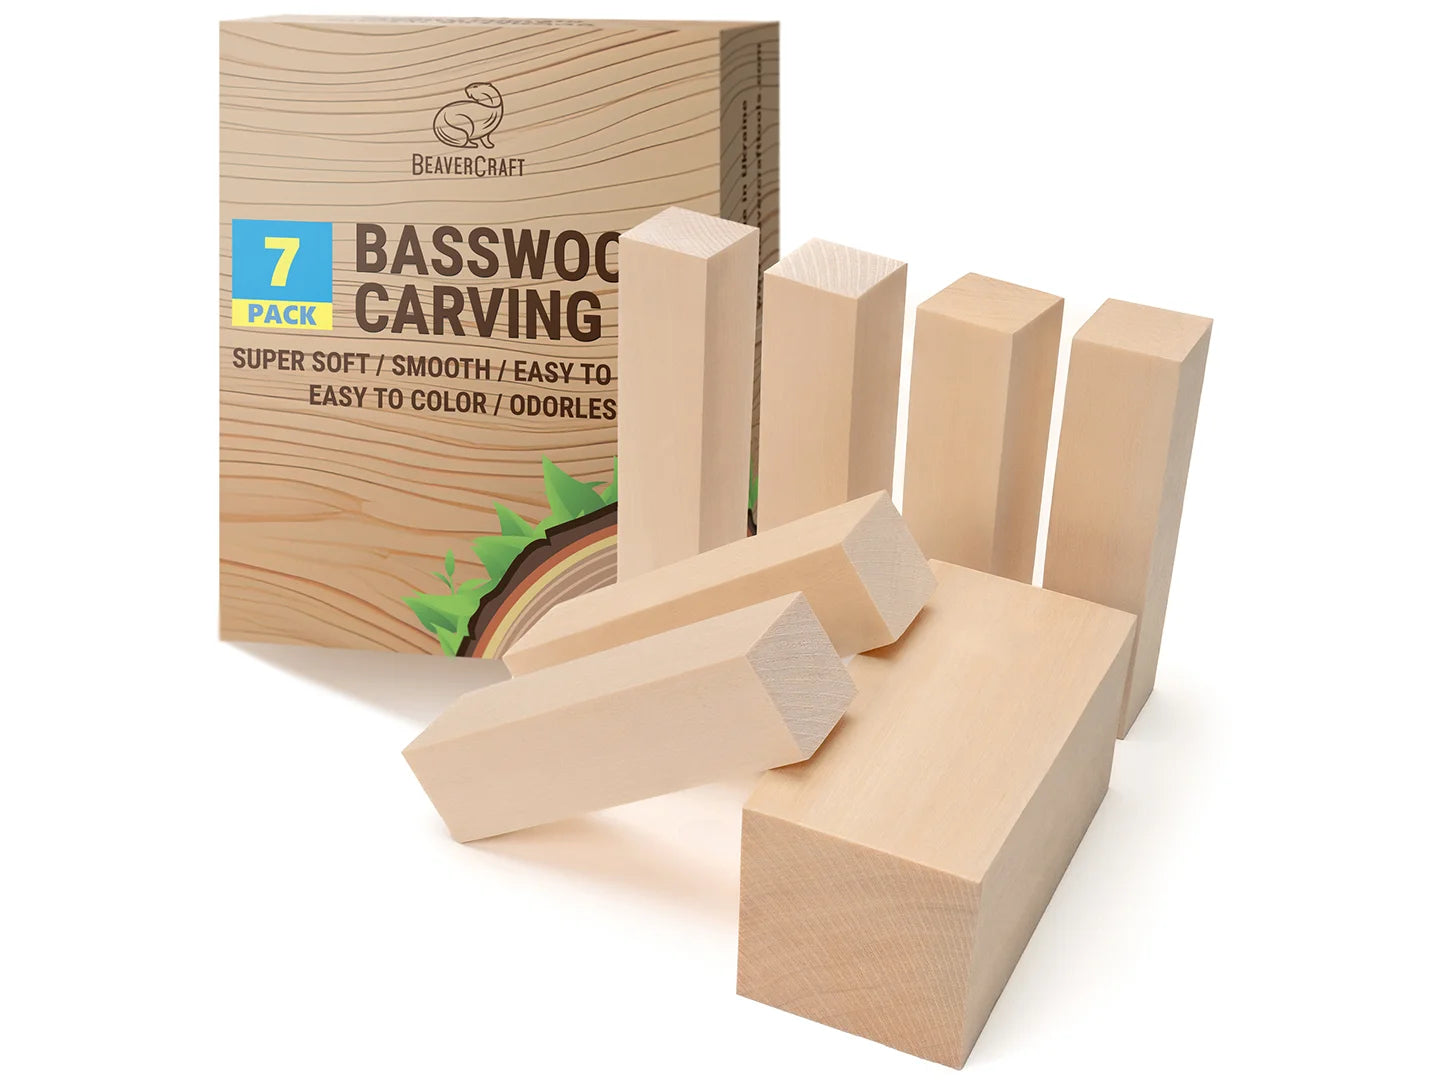 BASSWOOD CARVING BLOCKS BY BEAVERCRAFT UNBOXING AND REVIEW 